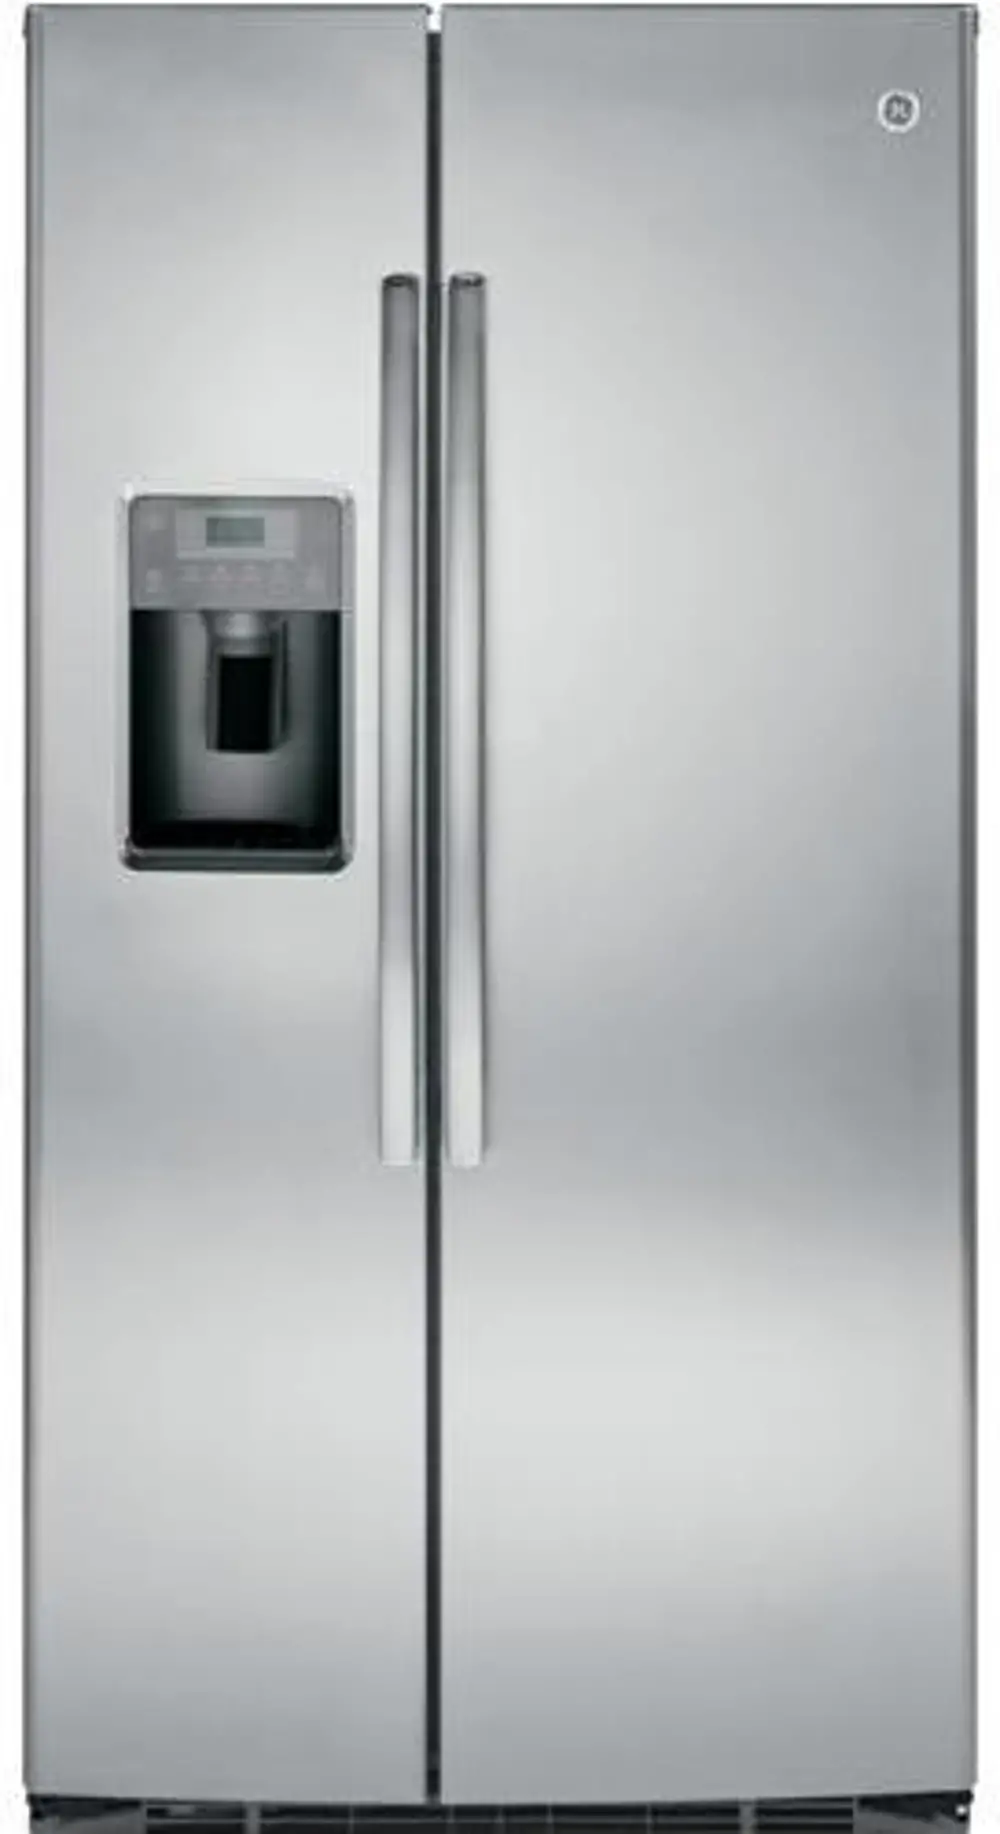 GSE26HSESS GE 26 Cu. Ft. Side-by-Side Refrigerator-1